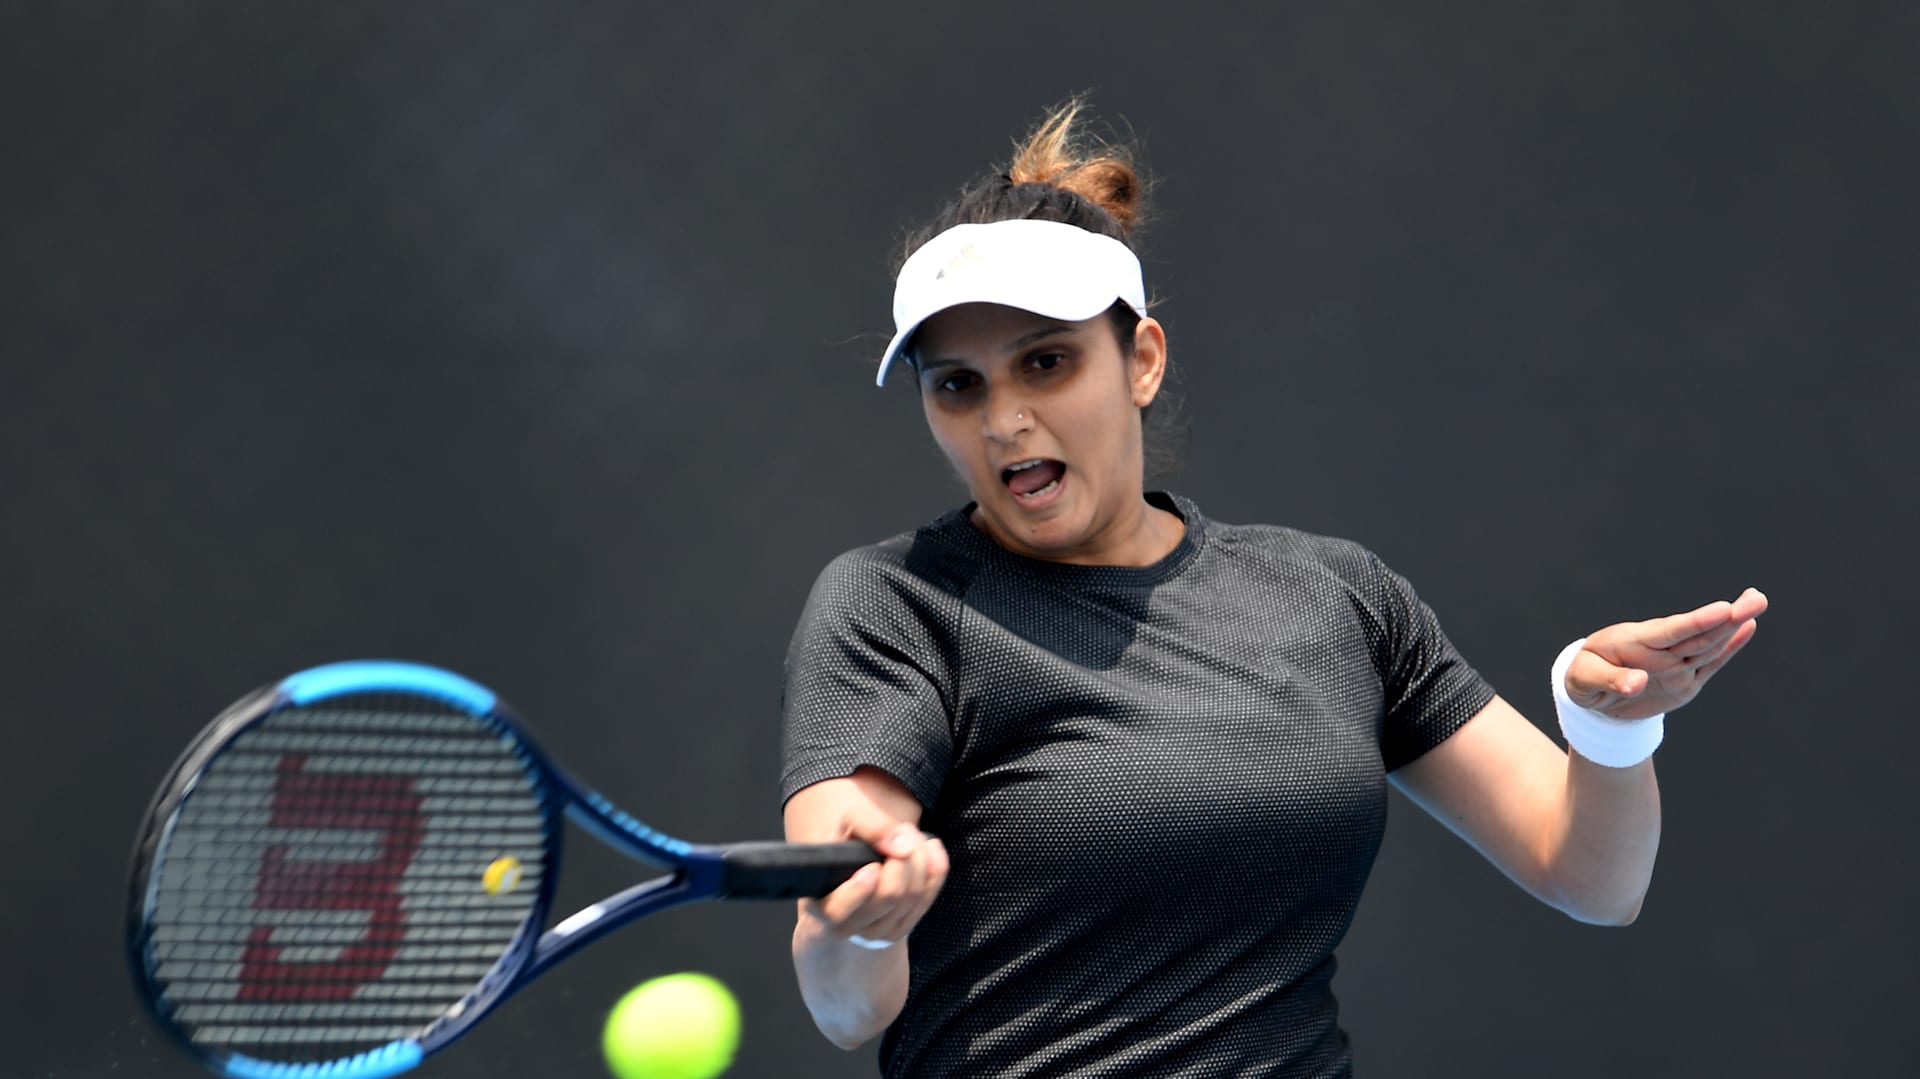 Xx Sania - Sania Mirza opens up on her weight loss journey in Instagram post